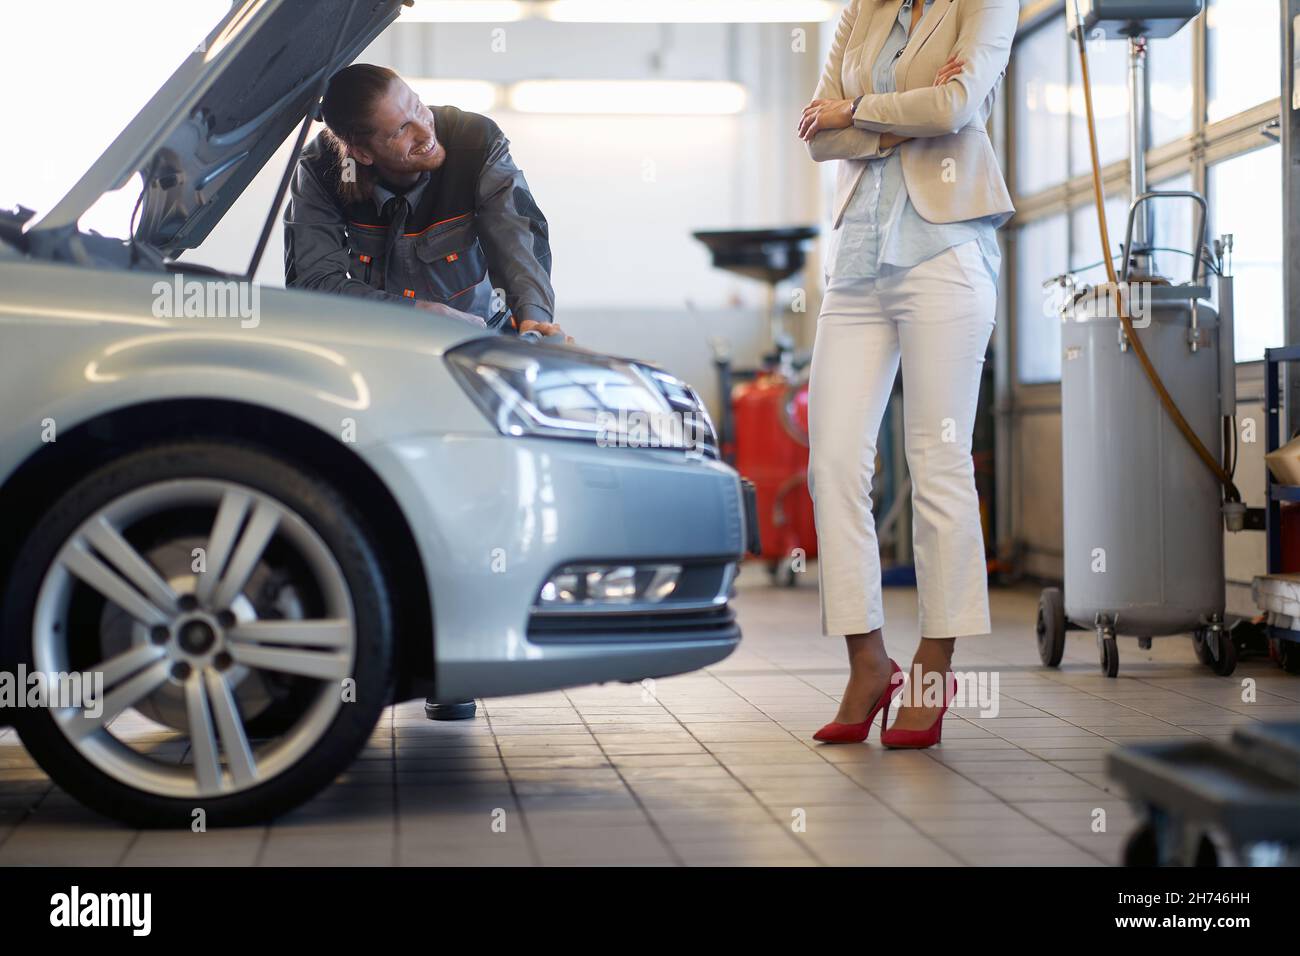 man mechanic communicates with the smiling woman client Stock Photo